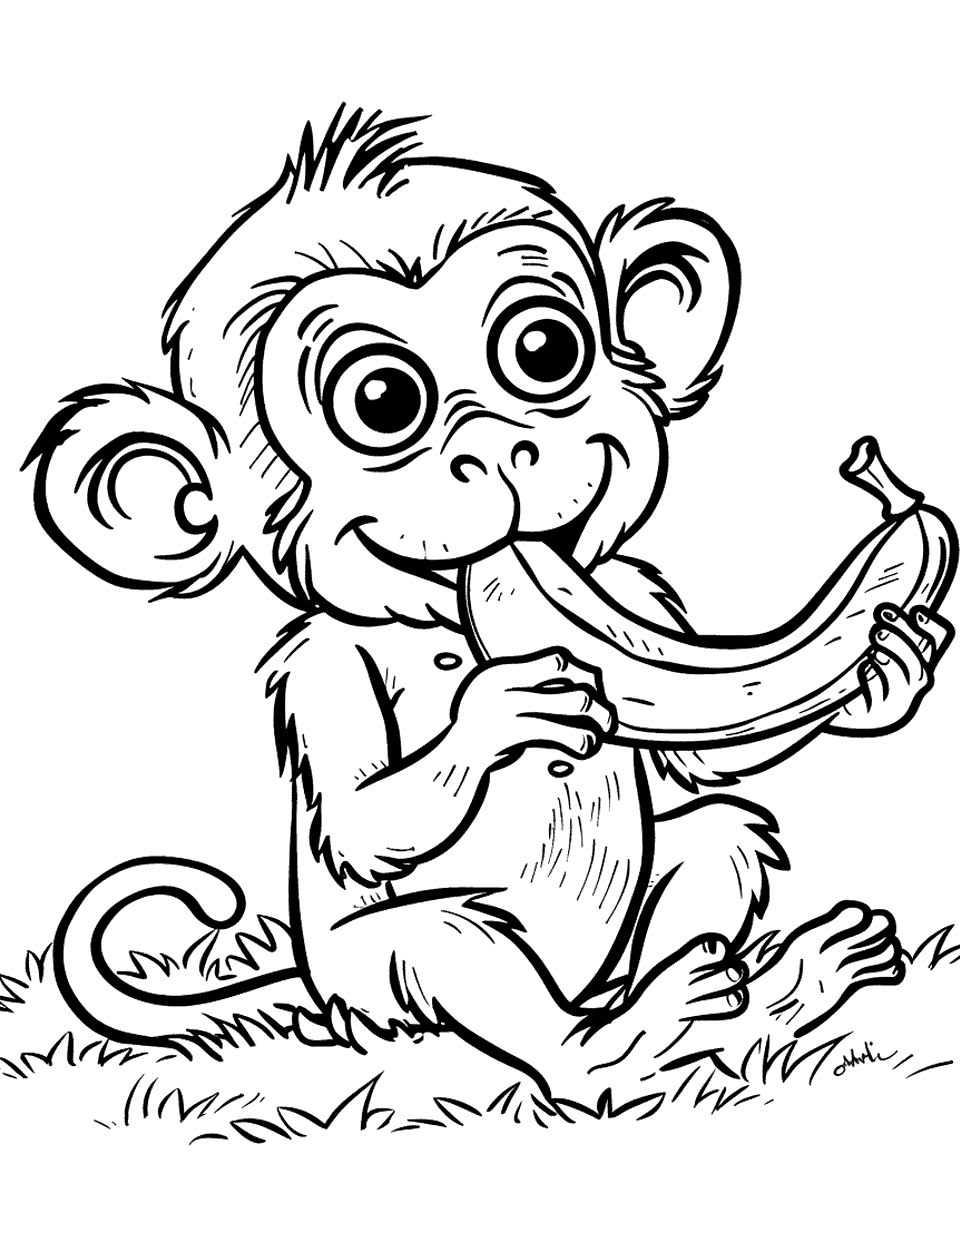 Monkey Eating Banana Coloring Page - A monkey eating a banana while sitting on a grassy ground.